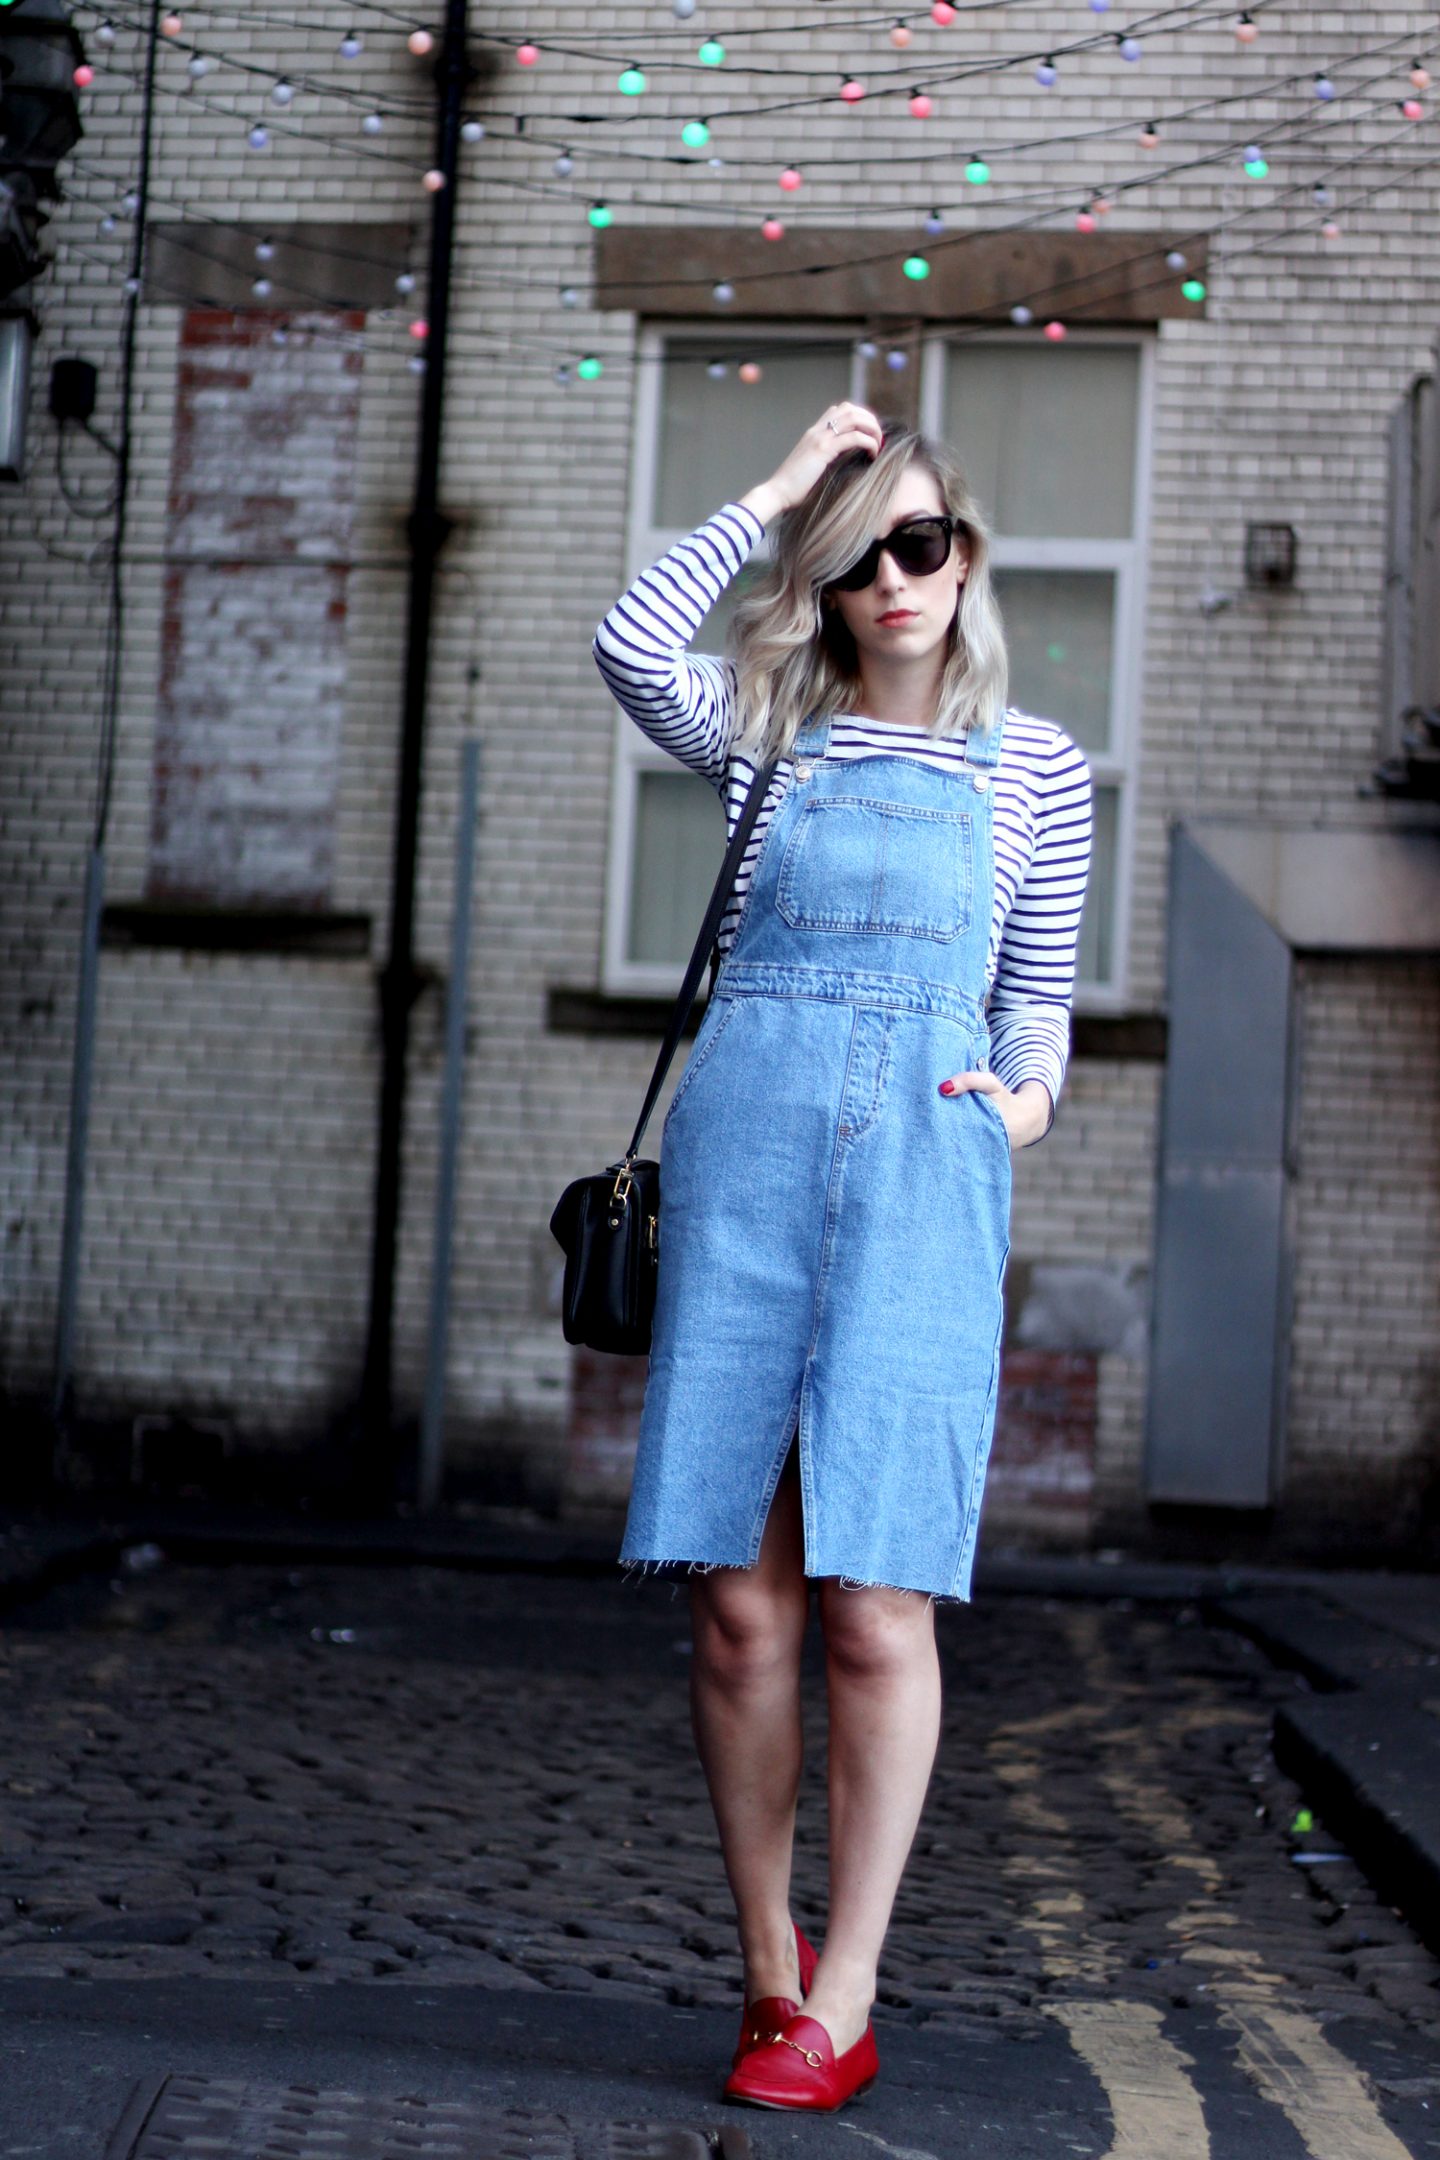 Helen vs The Dungaree Dress - The Lovecats Inc